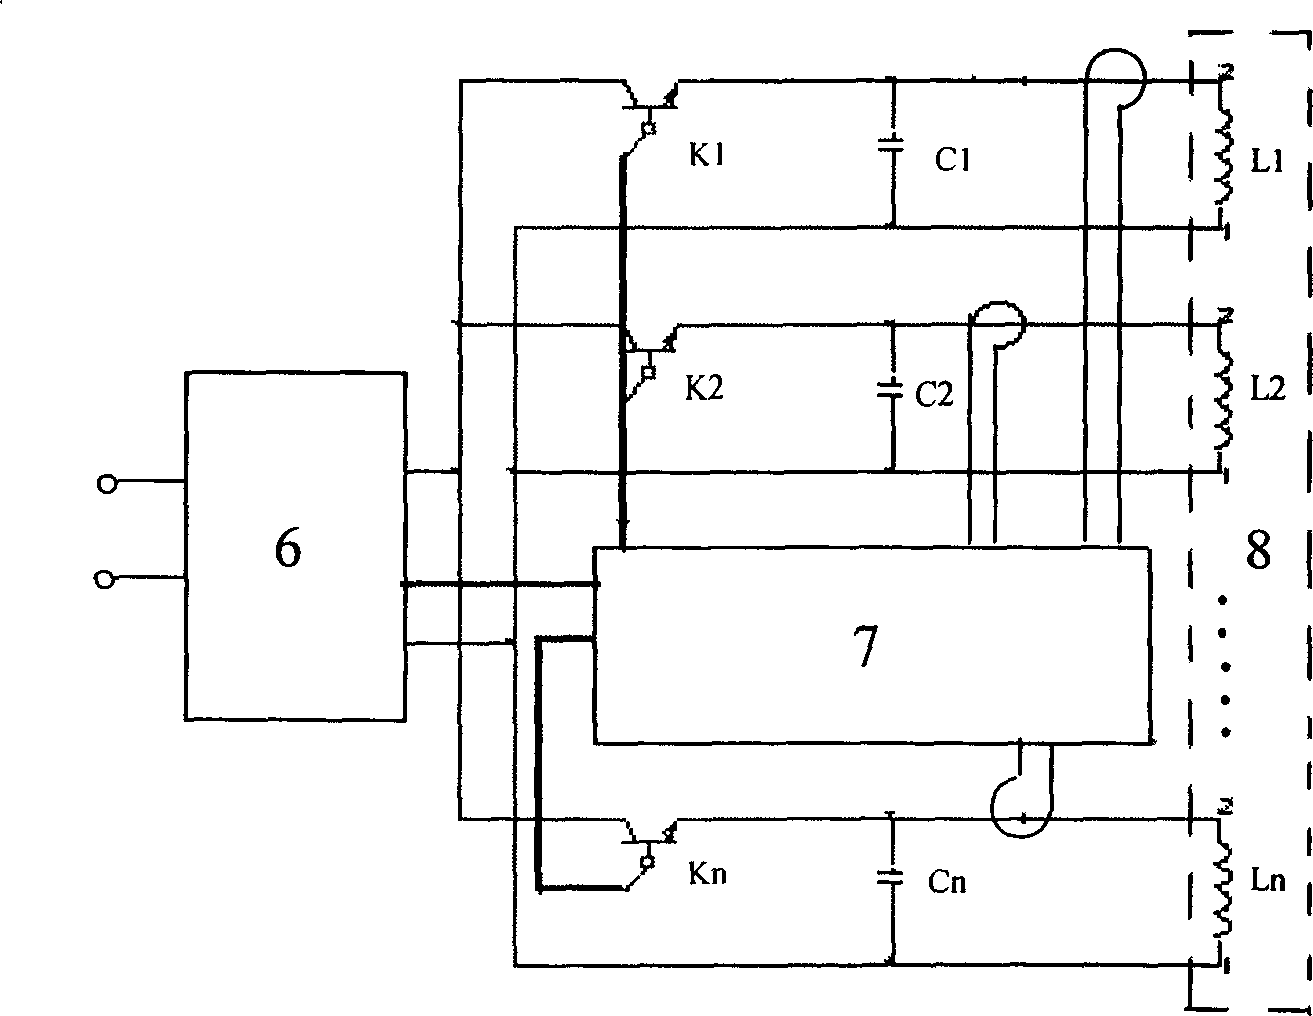 Power source board able to be controlled in zone